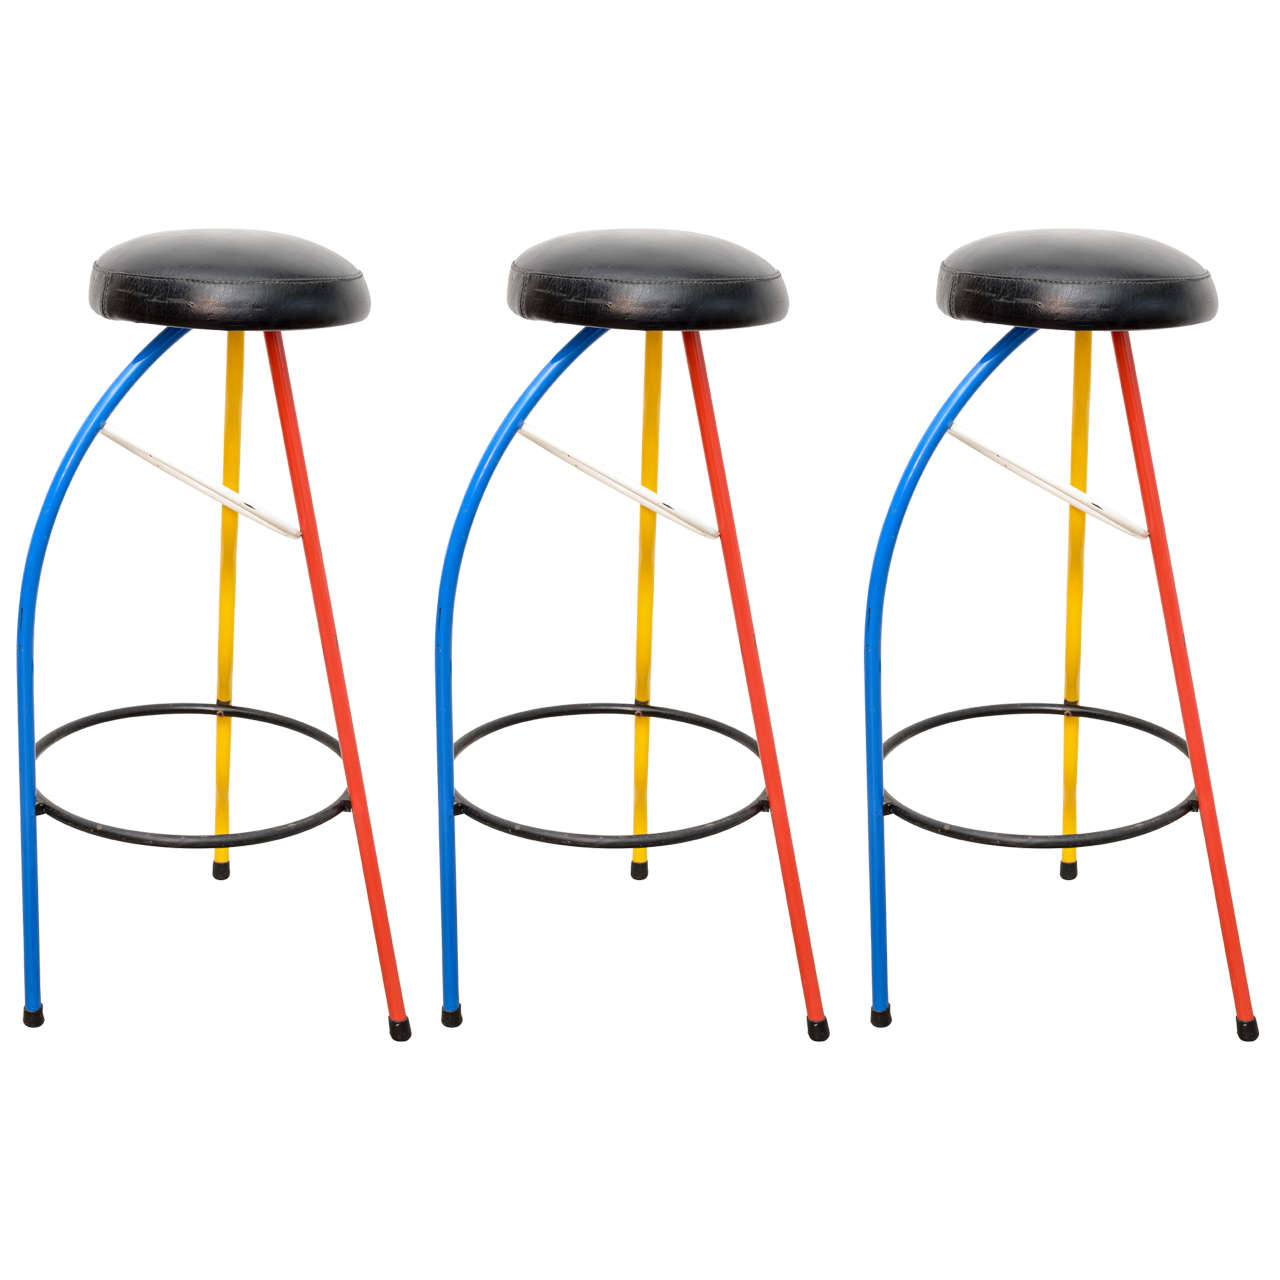 Fun Colorful Memphis Barstools by Javier Mariscal